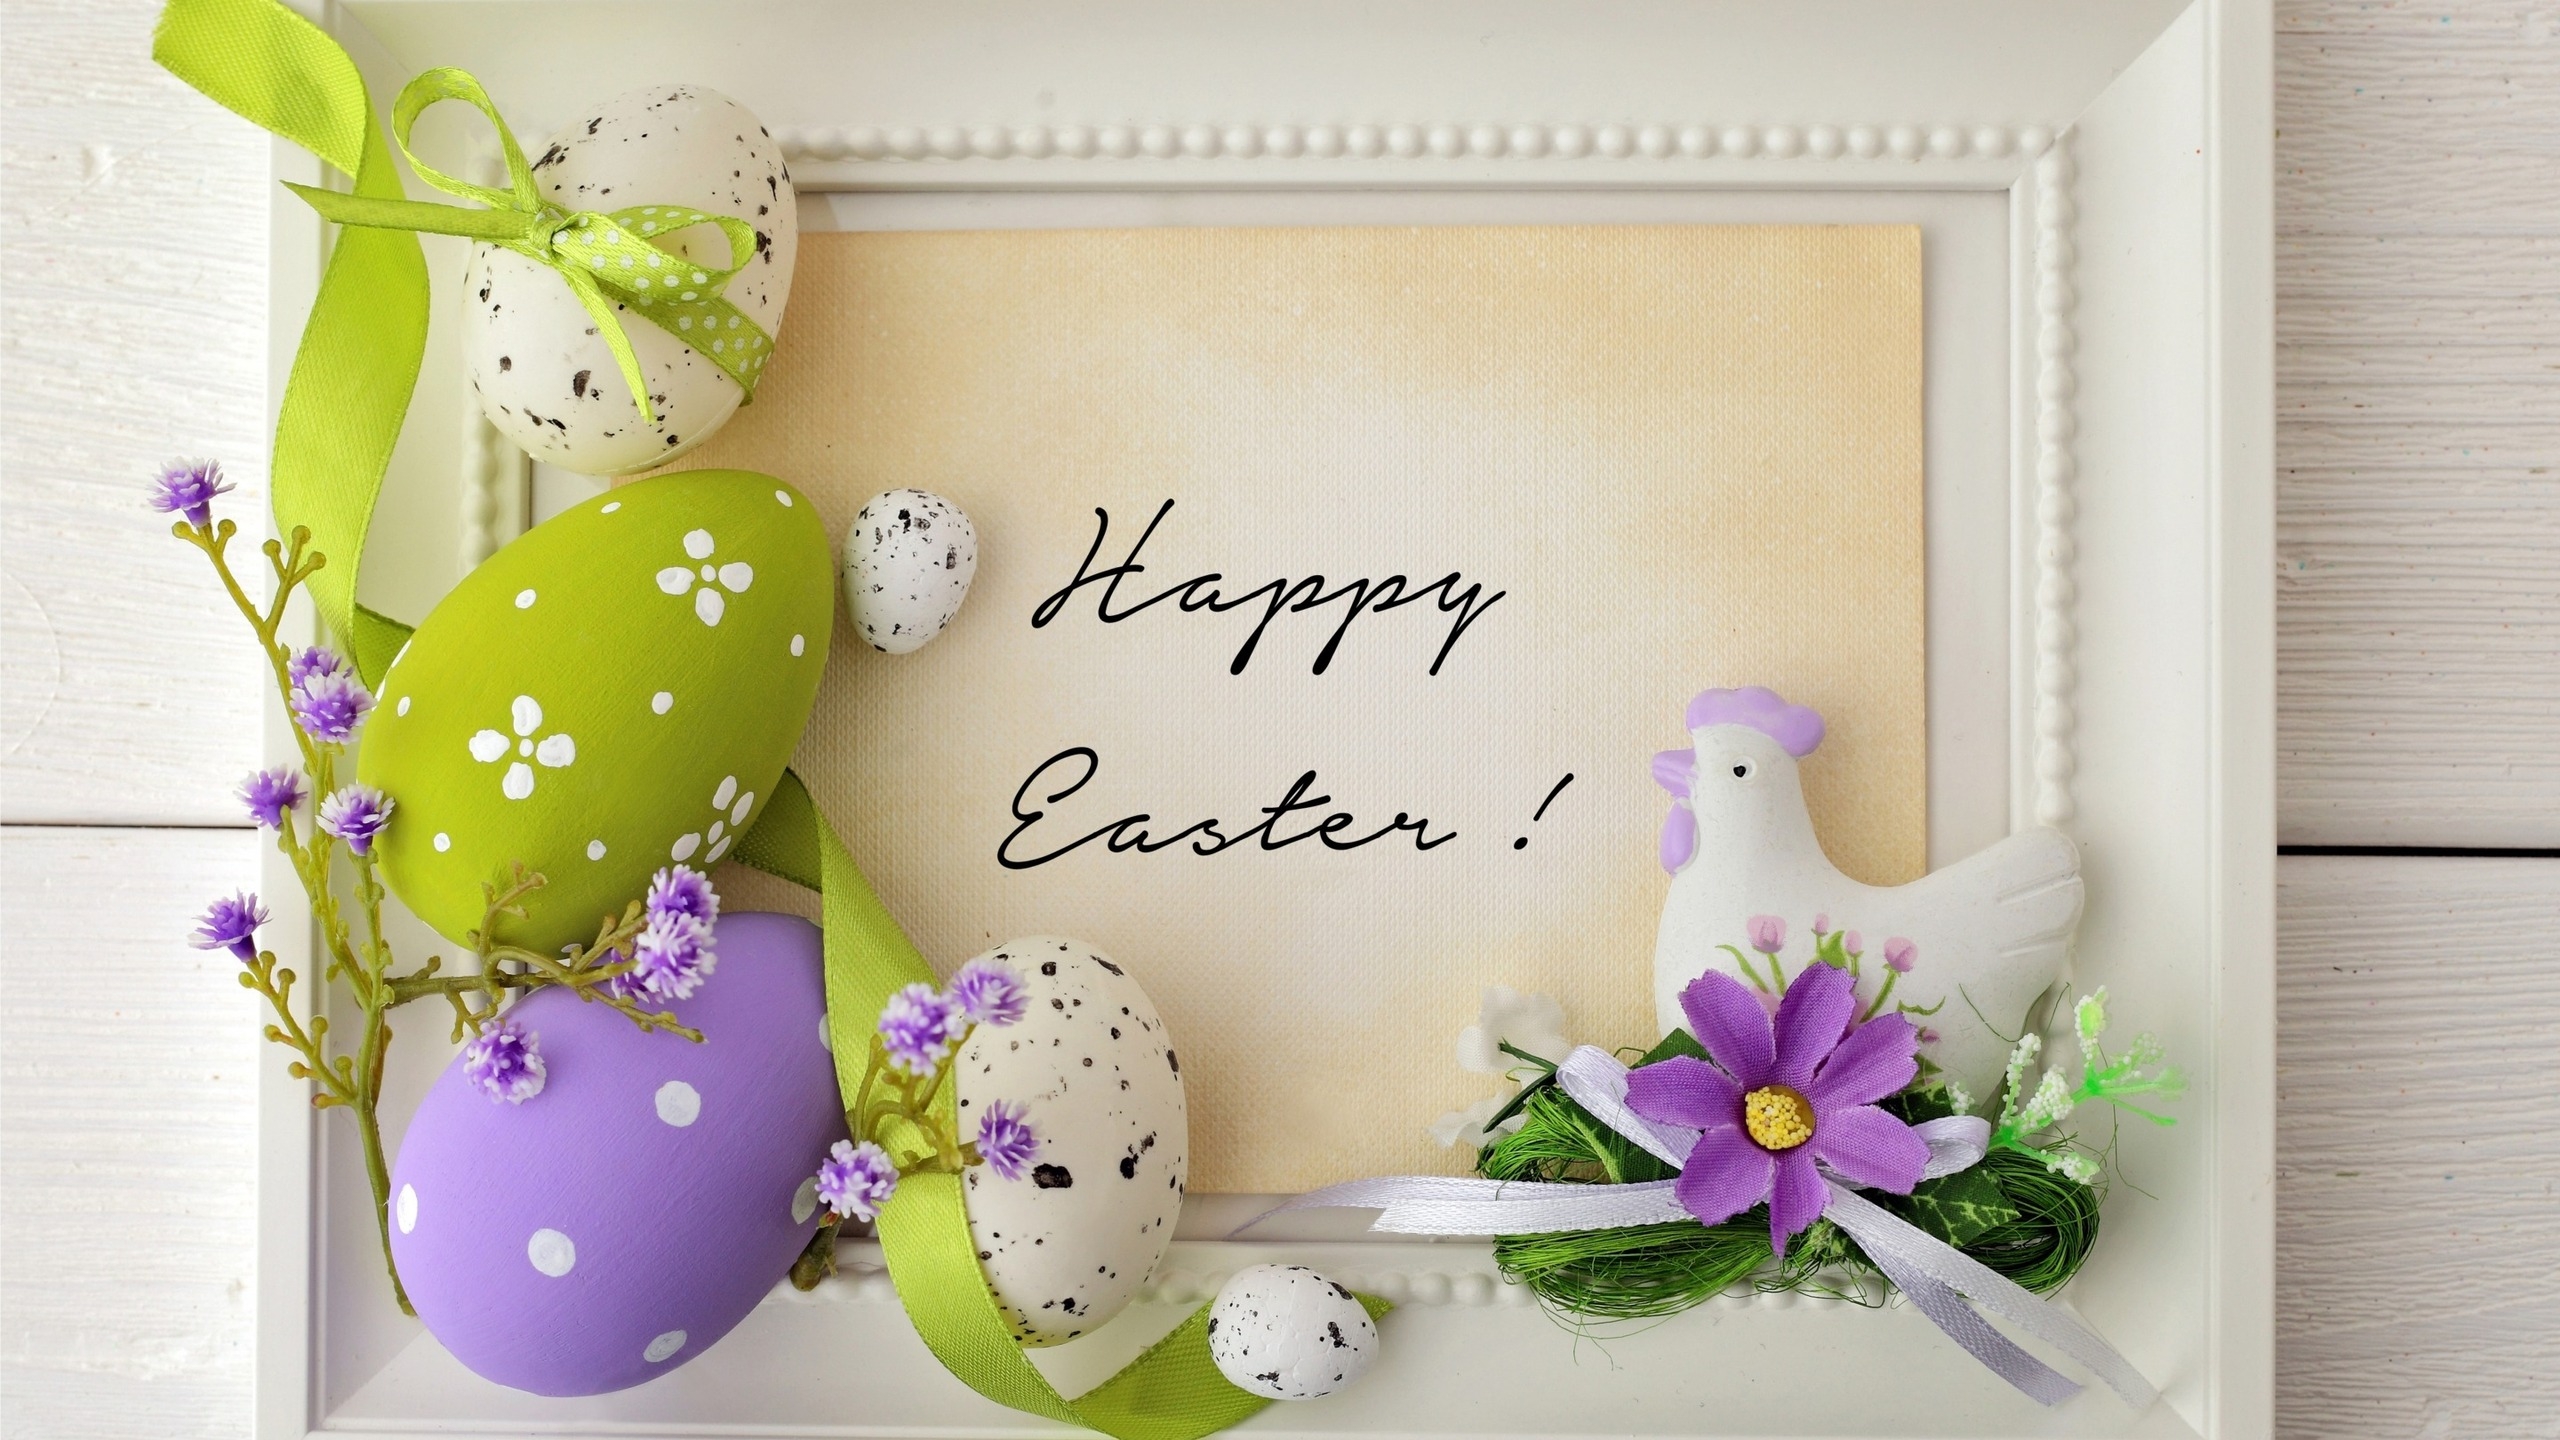 Happy Easter 2015 for 2560x1440 HDTV resolution